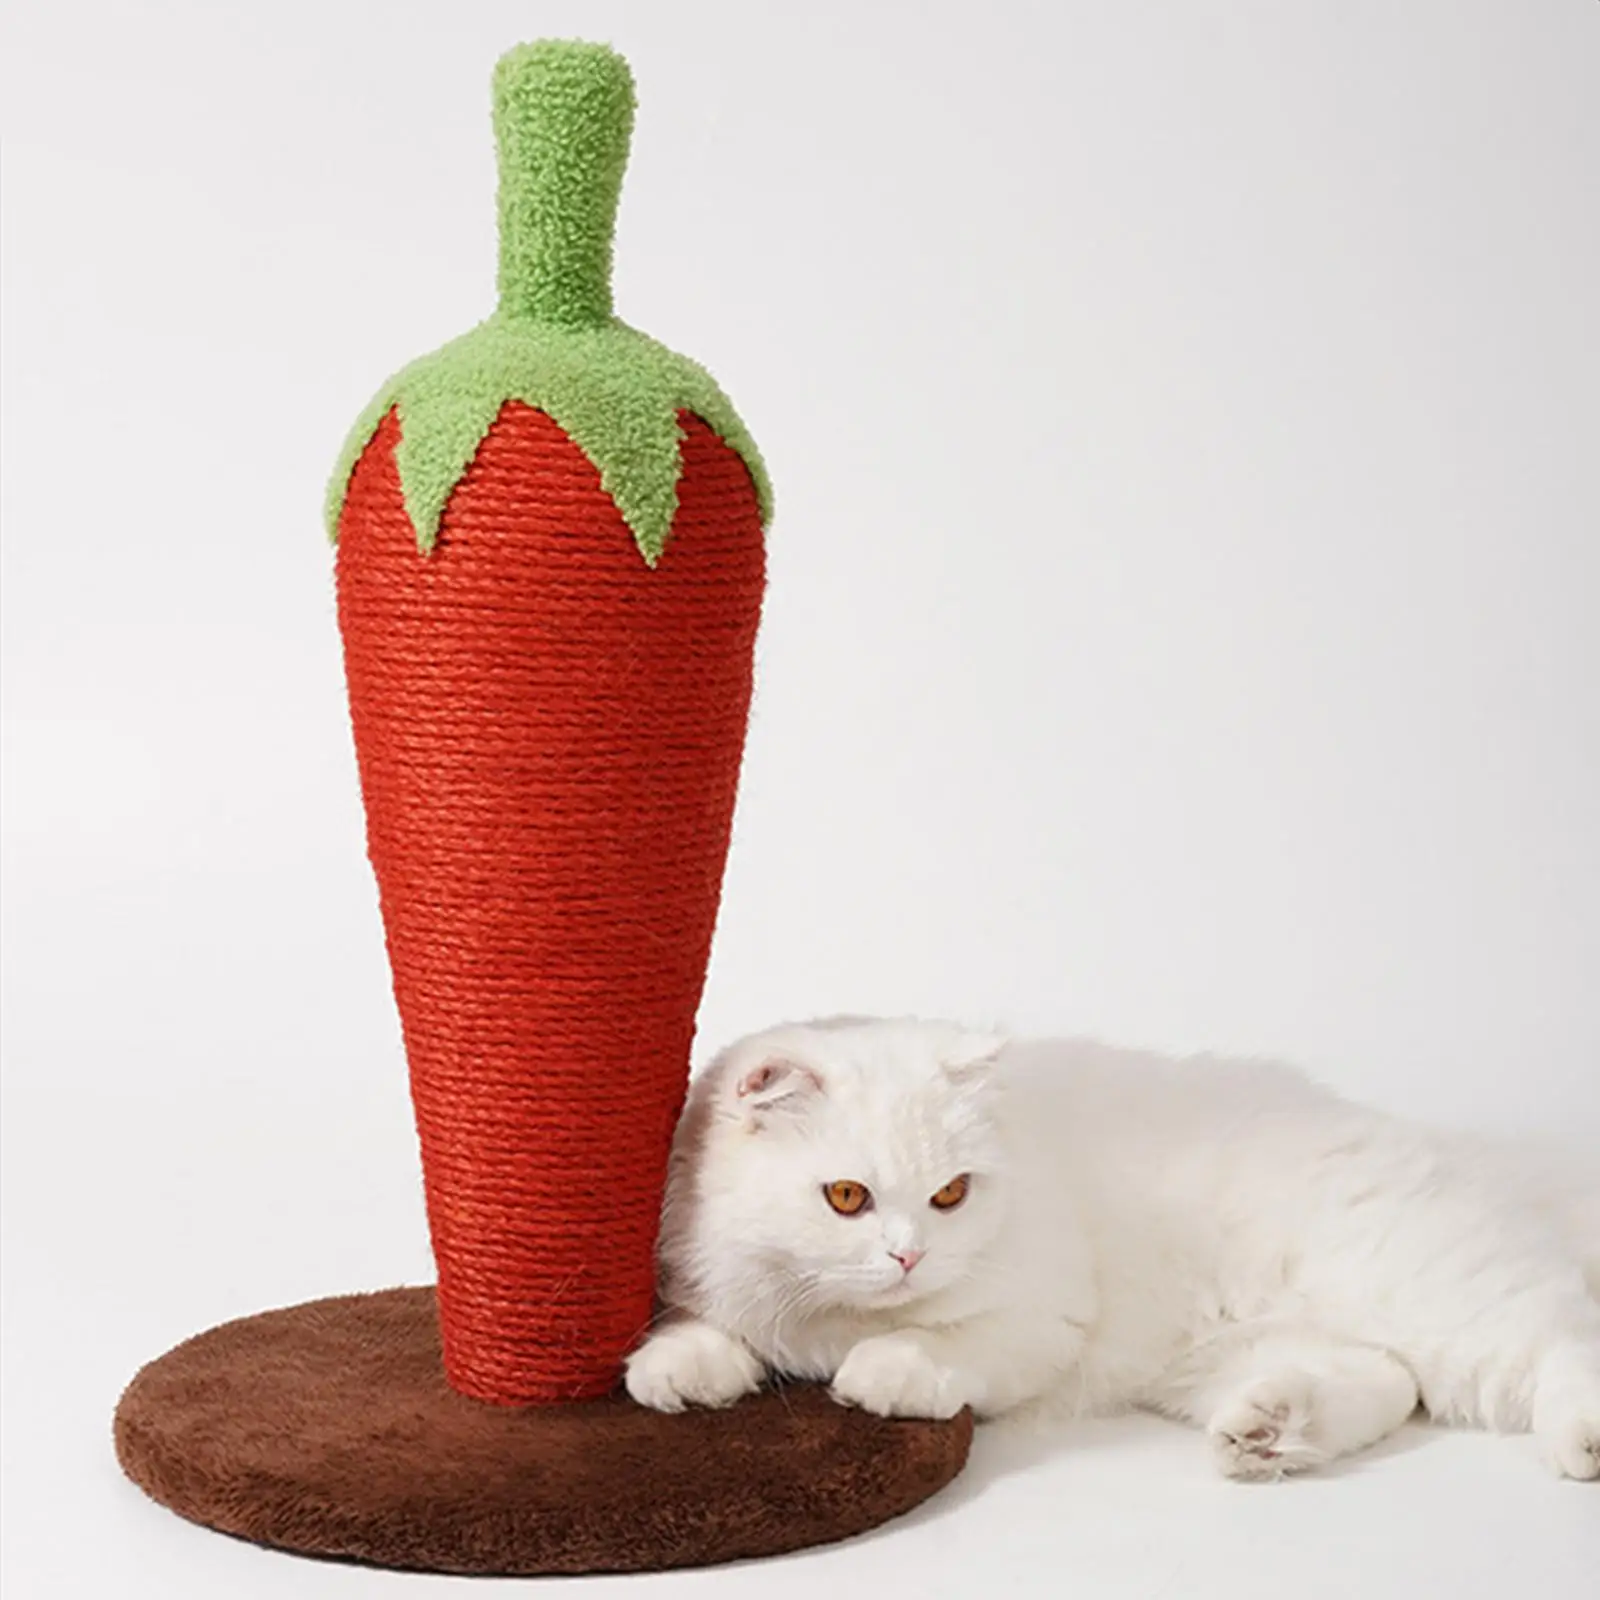 Cute Scratcher Pad Protect Cats Nails Activity Tree Sisal Rope Interactive Toys Carrot Decorative Cat Scratching Post for Kitty